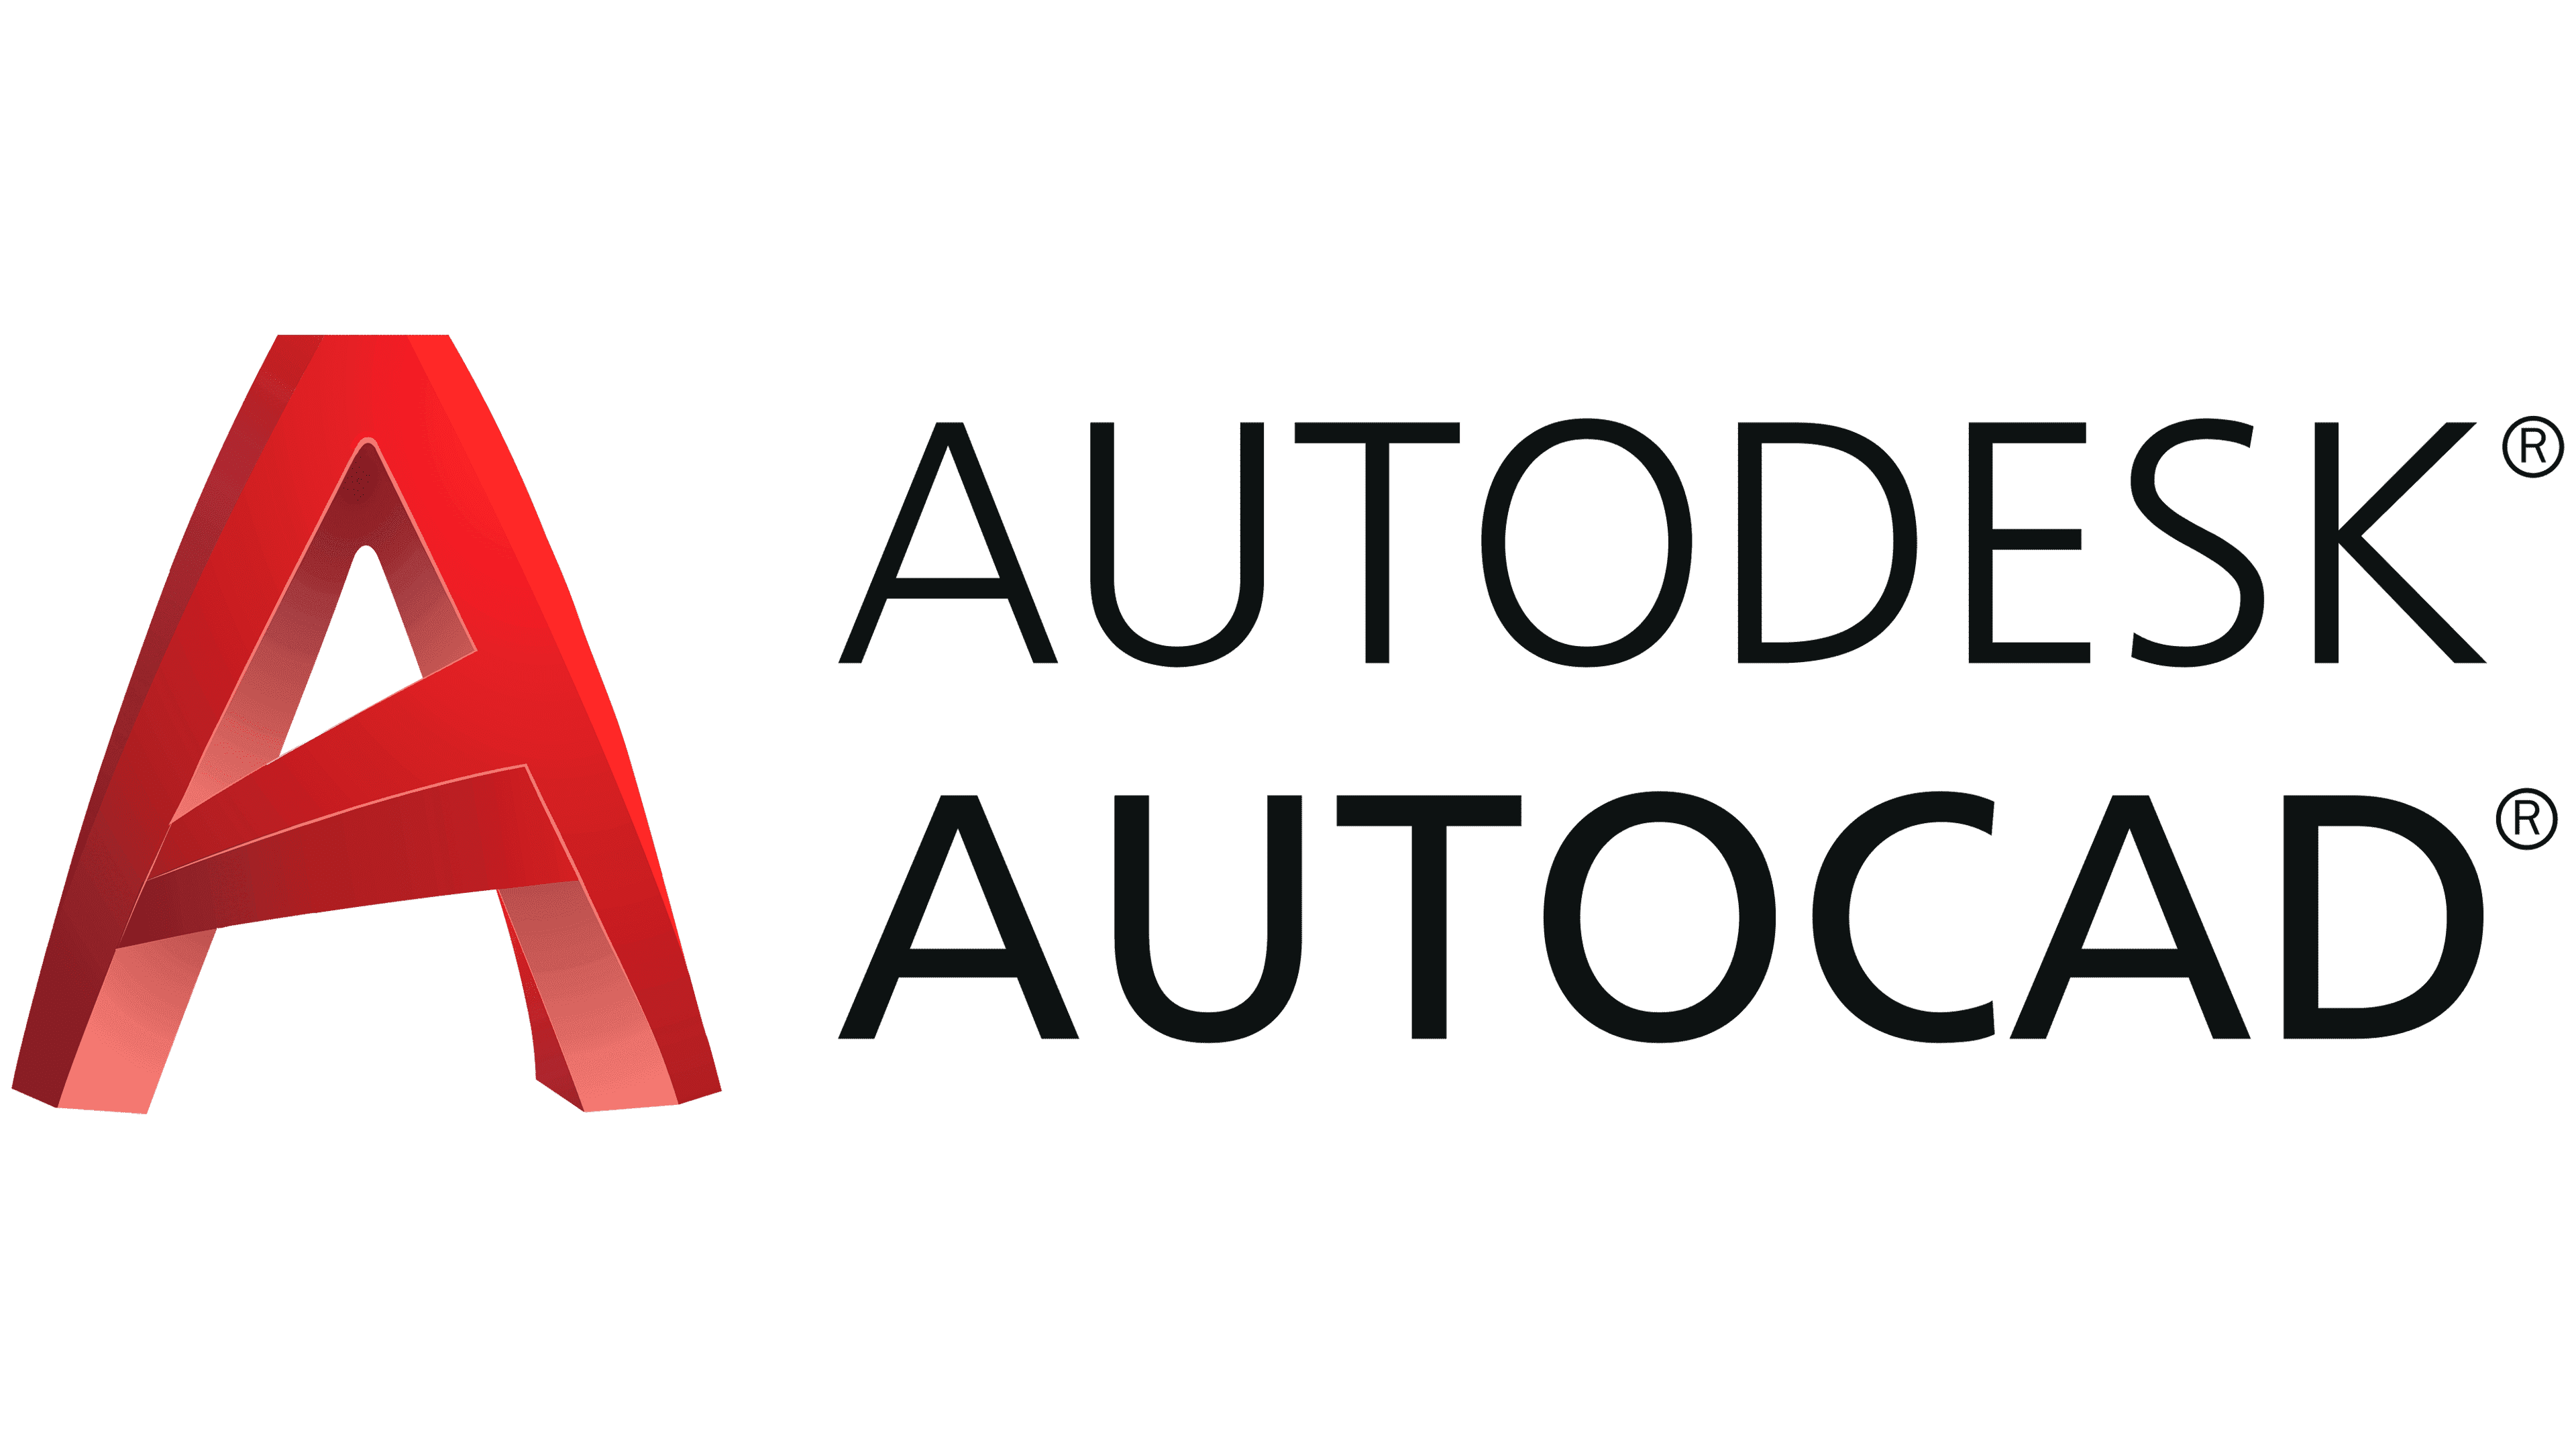 AutoCAD is a widely used 3D design and drafting software. It offers a comprehensive set of tools for creating precise 2D and 3D models, and it is commonly used in architecture, engineering, and construction industries.